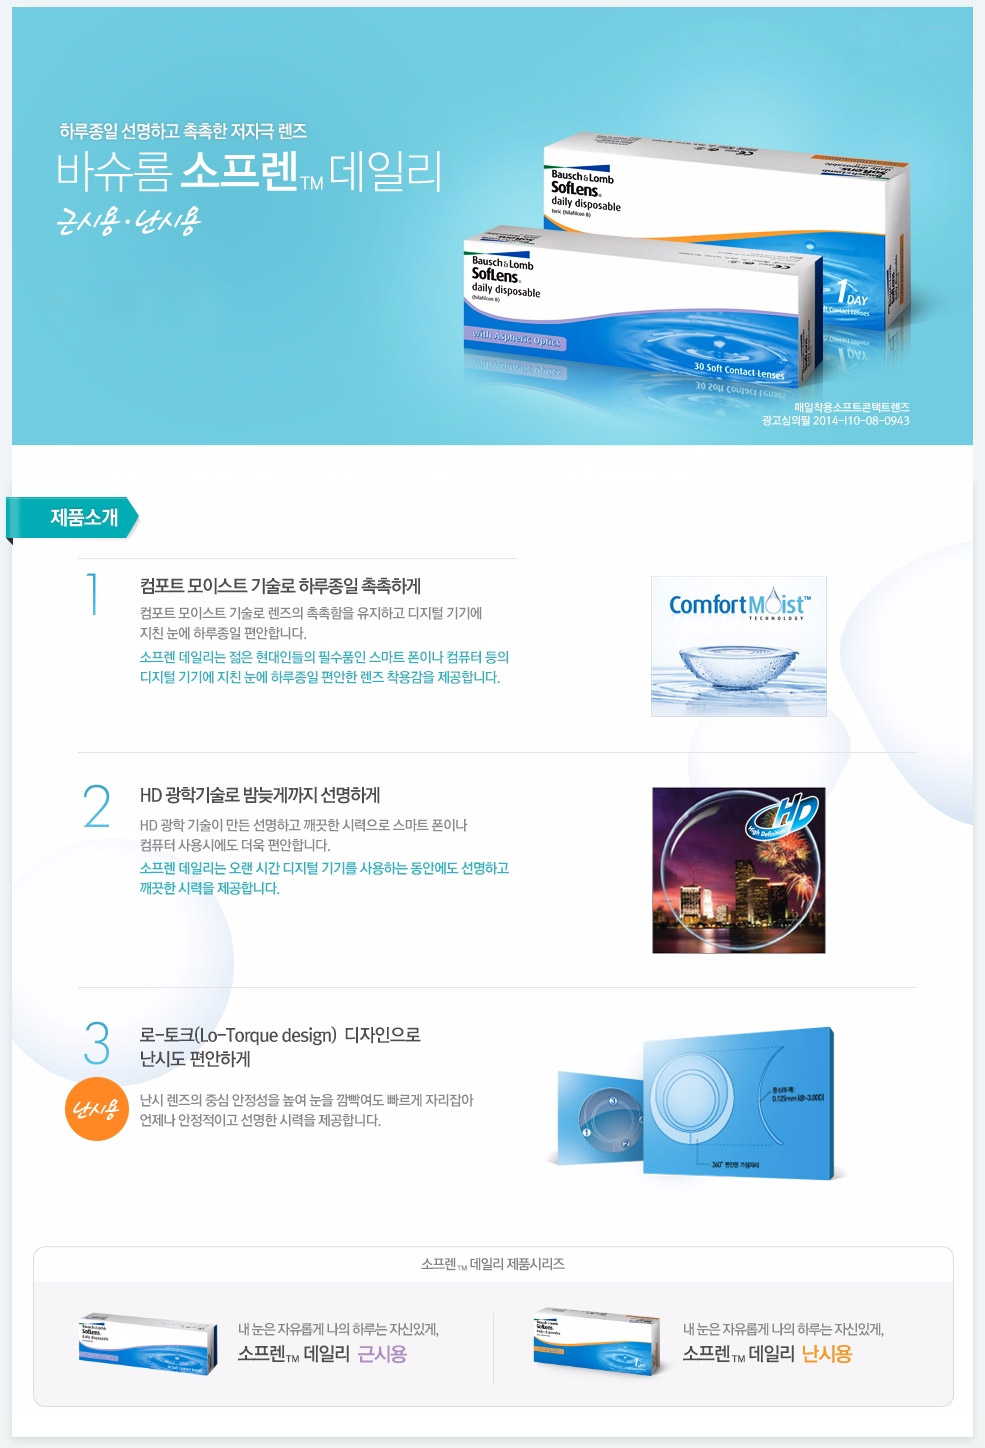 Sixth description images of Bausch & Lomb 1-day Soflens Toric Clear Contact Lenses (30pcs)